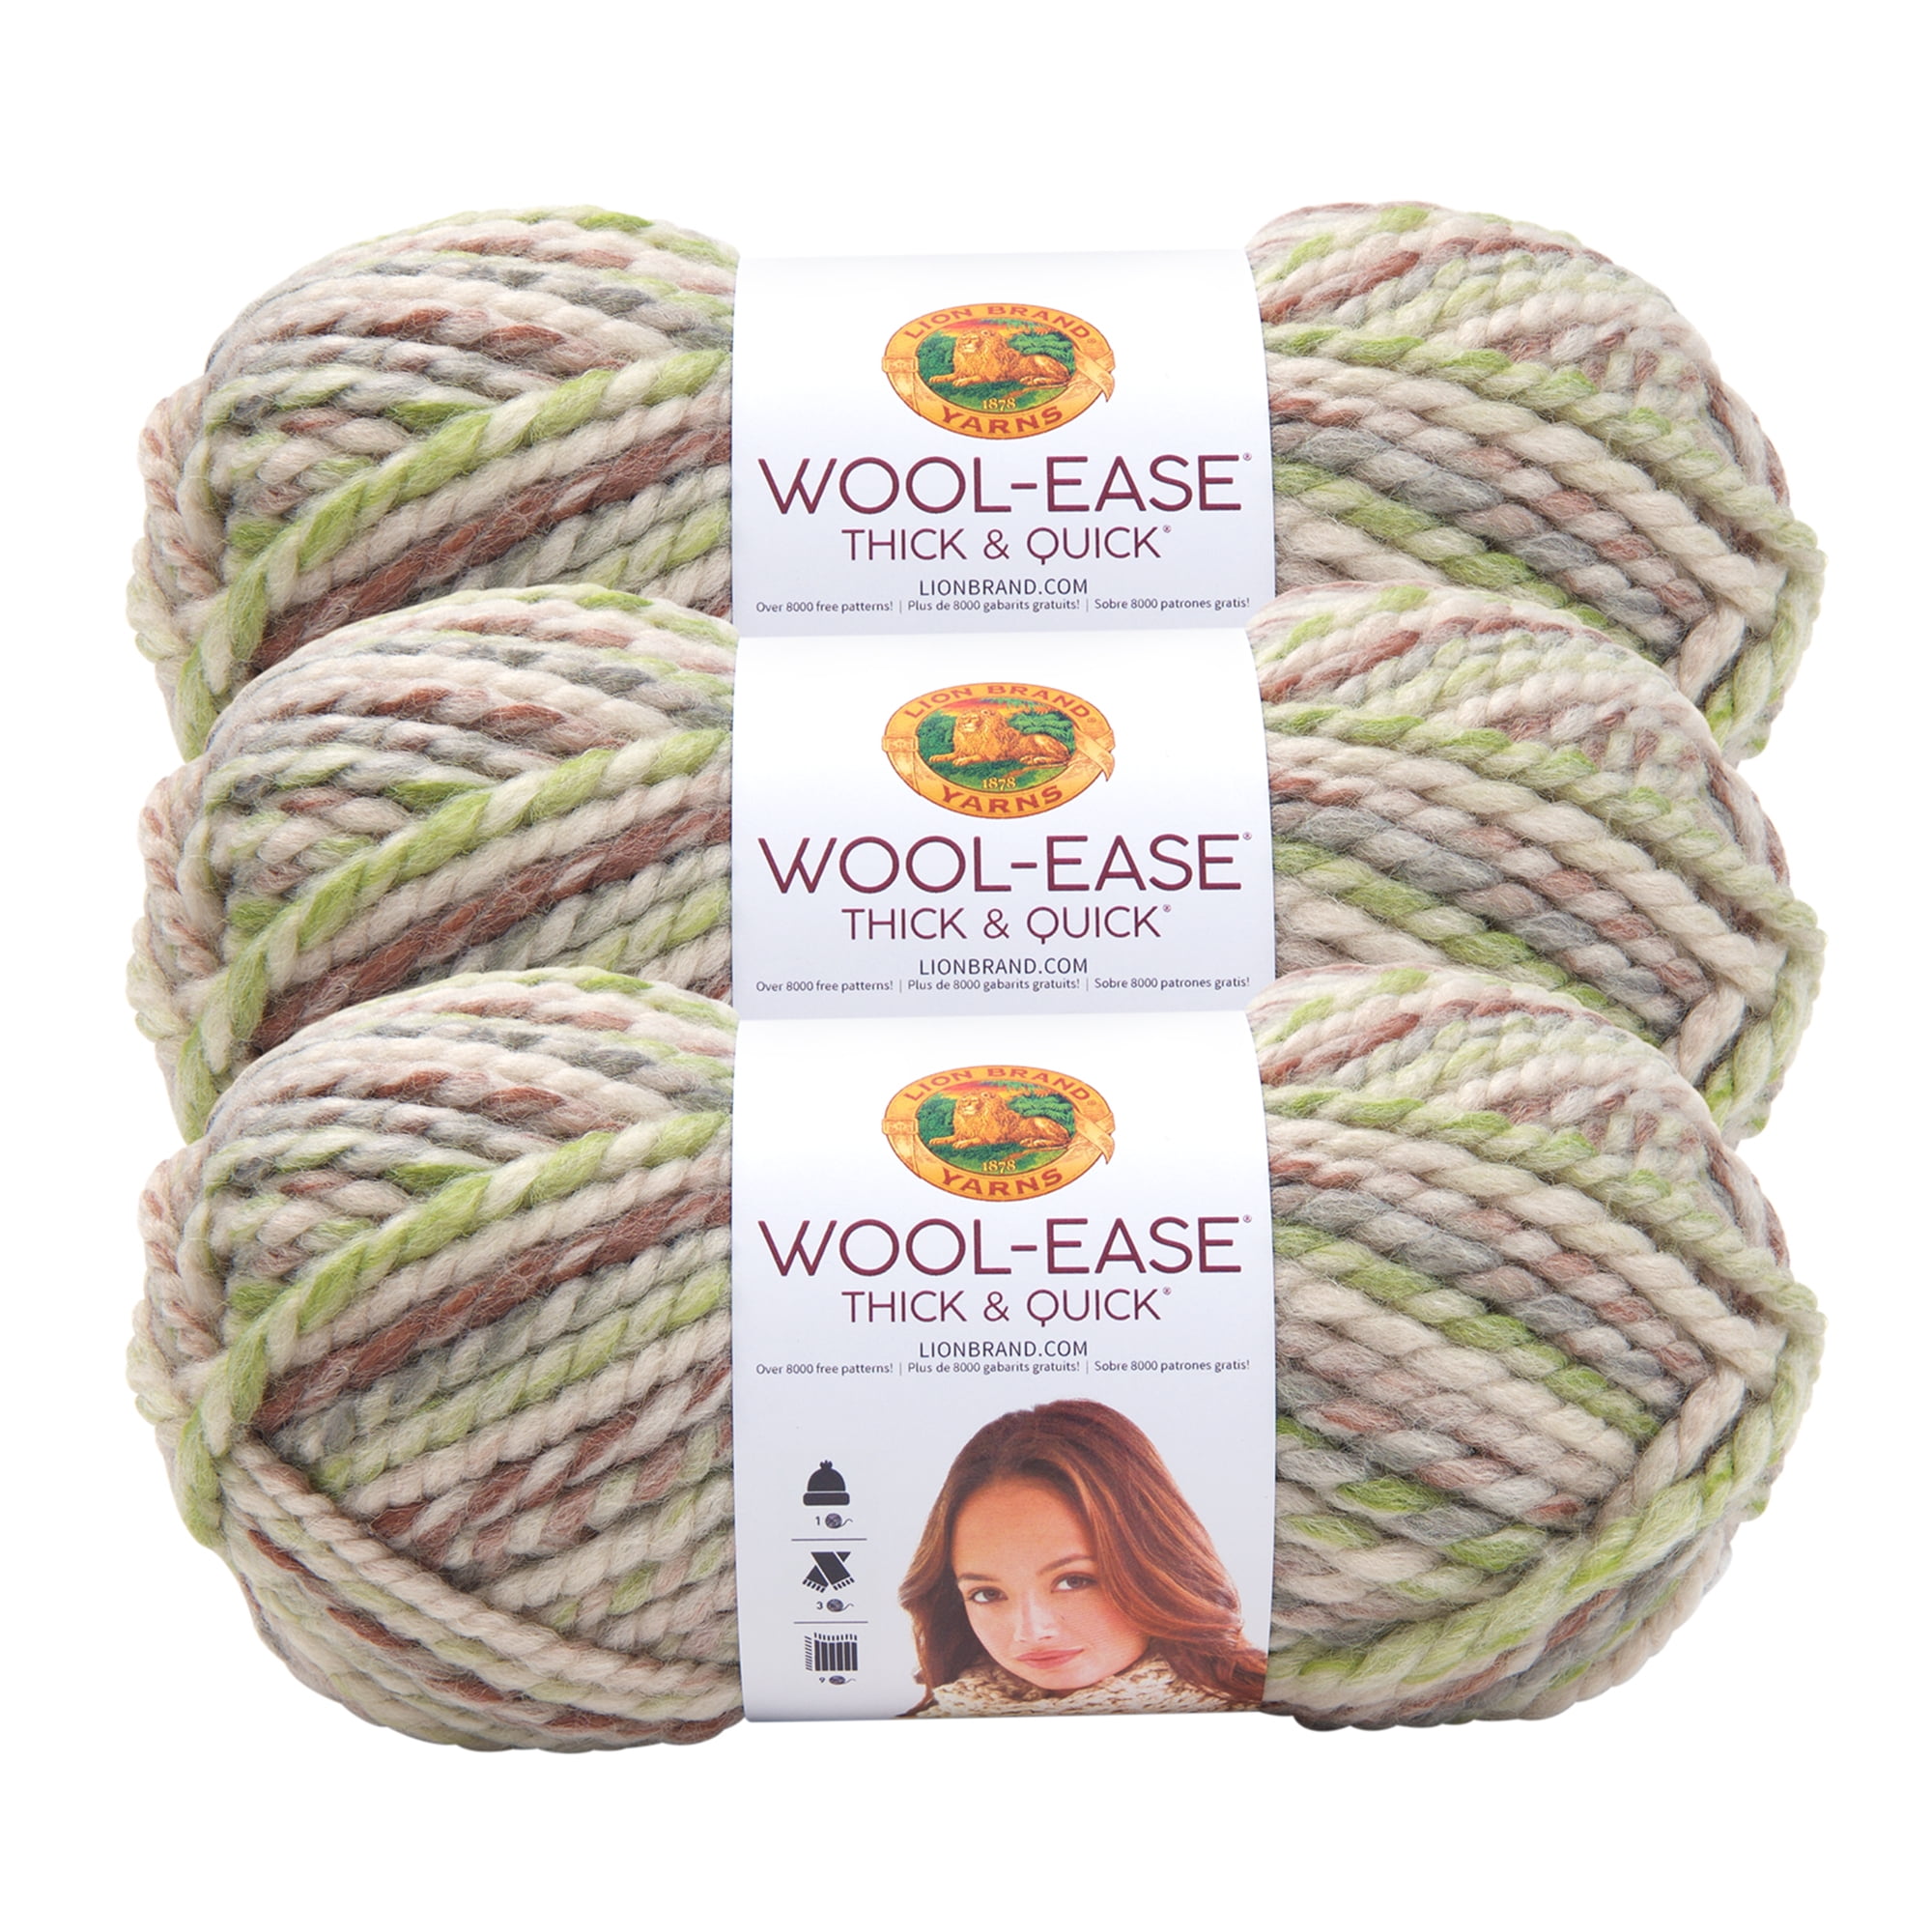 Lion Brand Yarn Wool-Ease Thick & Quick Yarn, Soft and Bulky Yarn for  Knitting, Crocheting, and Crafting, 3 Pack, Fisherman